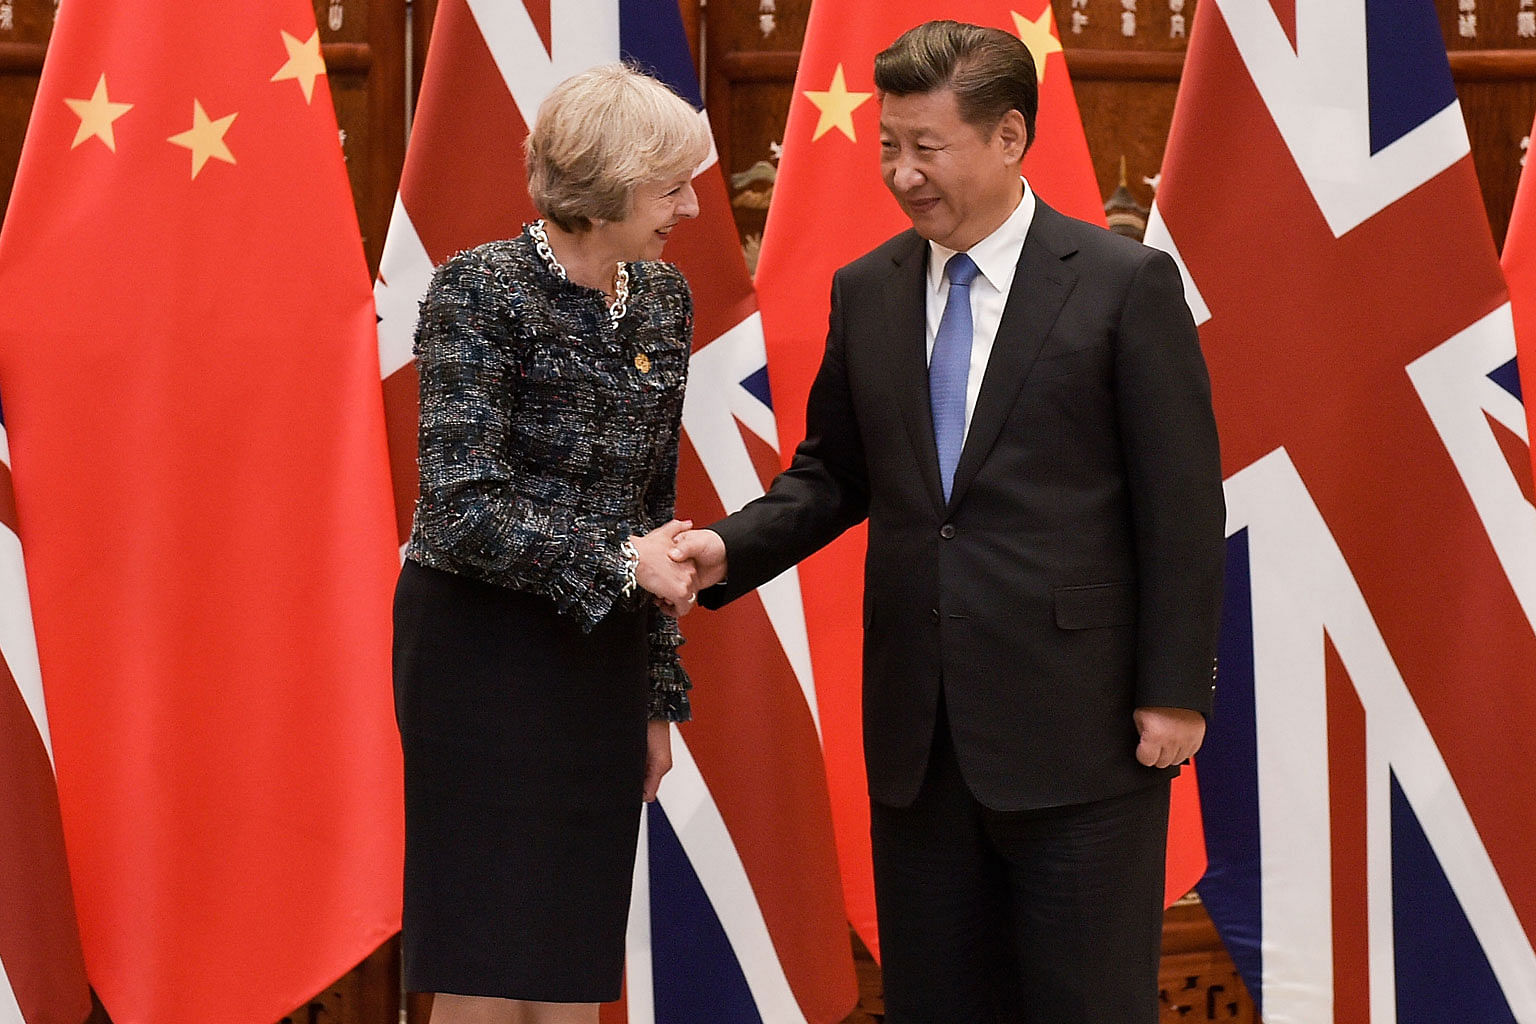 Chinese President Xi Jinping with British Prime Minister Theresa May during the Group of 20 summit in Hangzhou, China, in 2016.